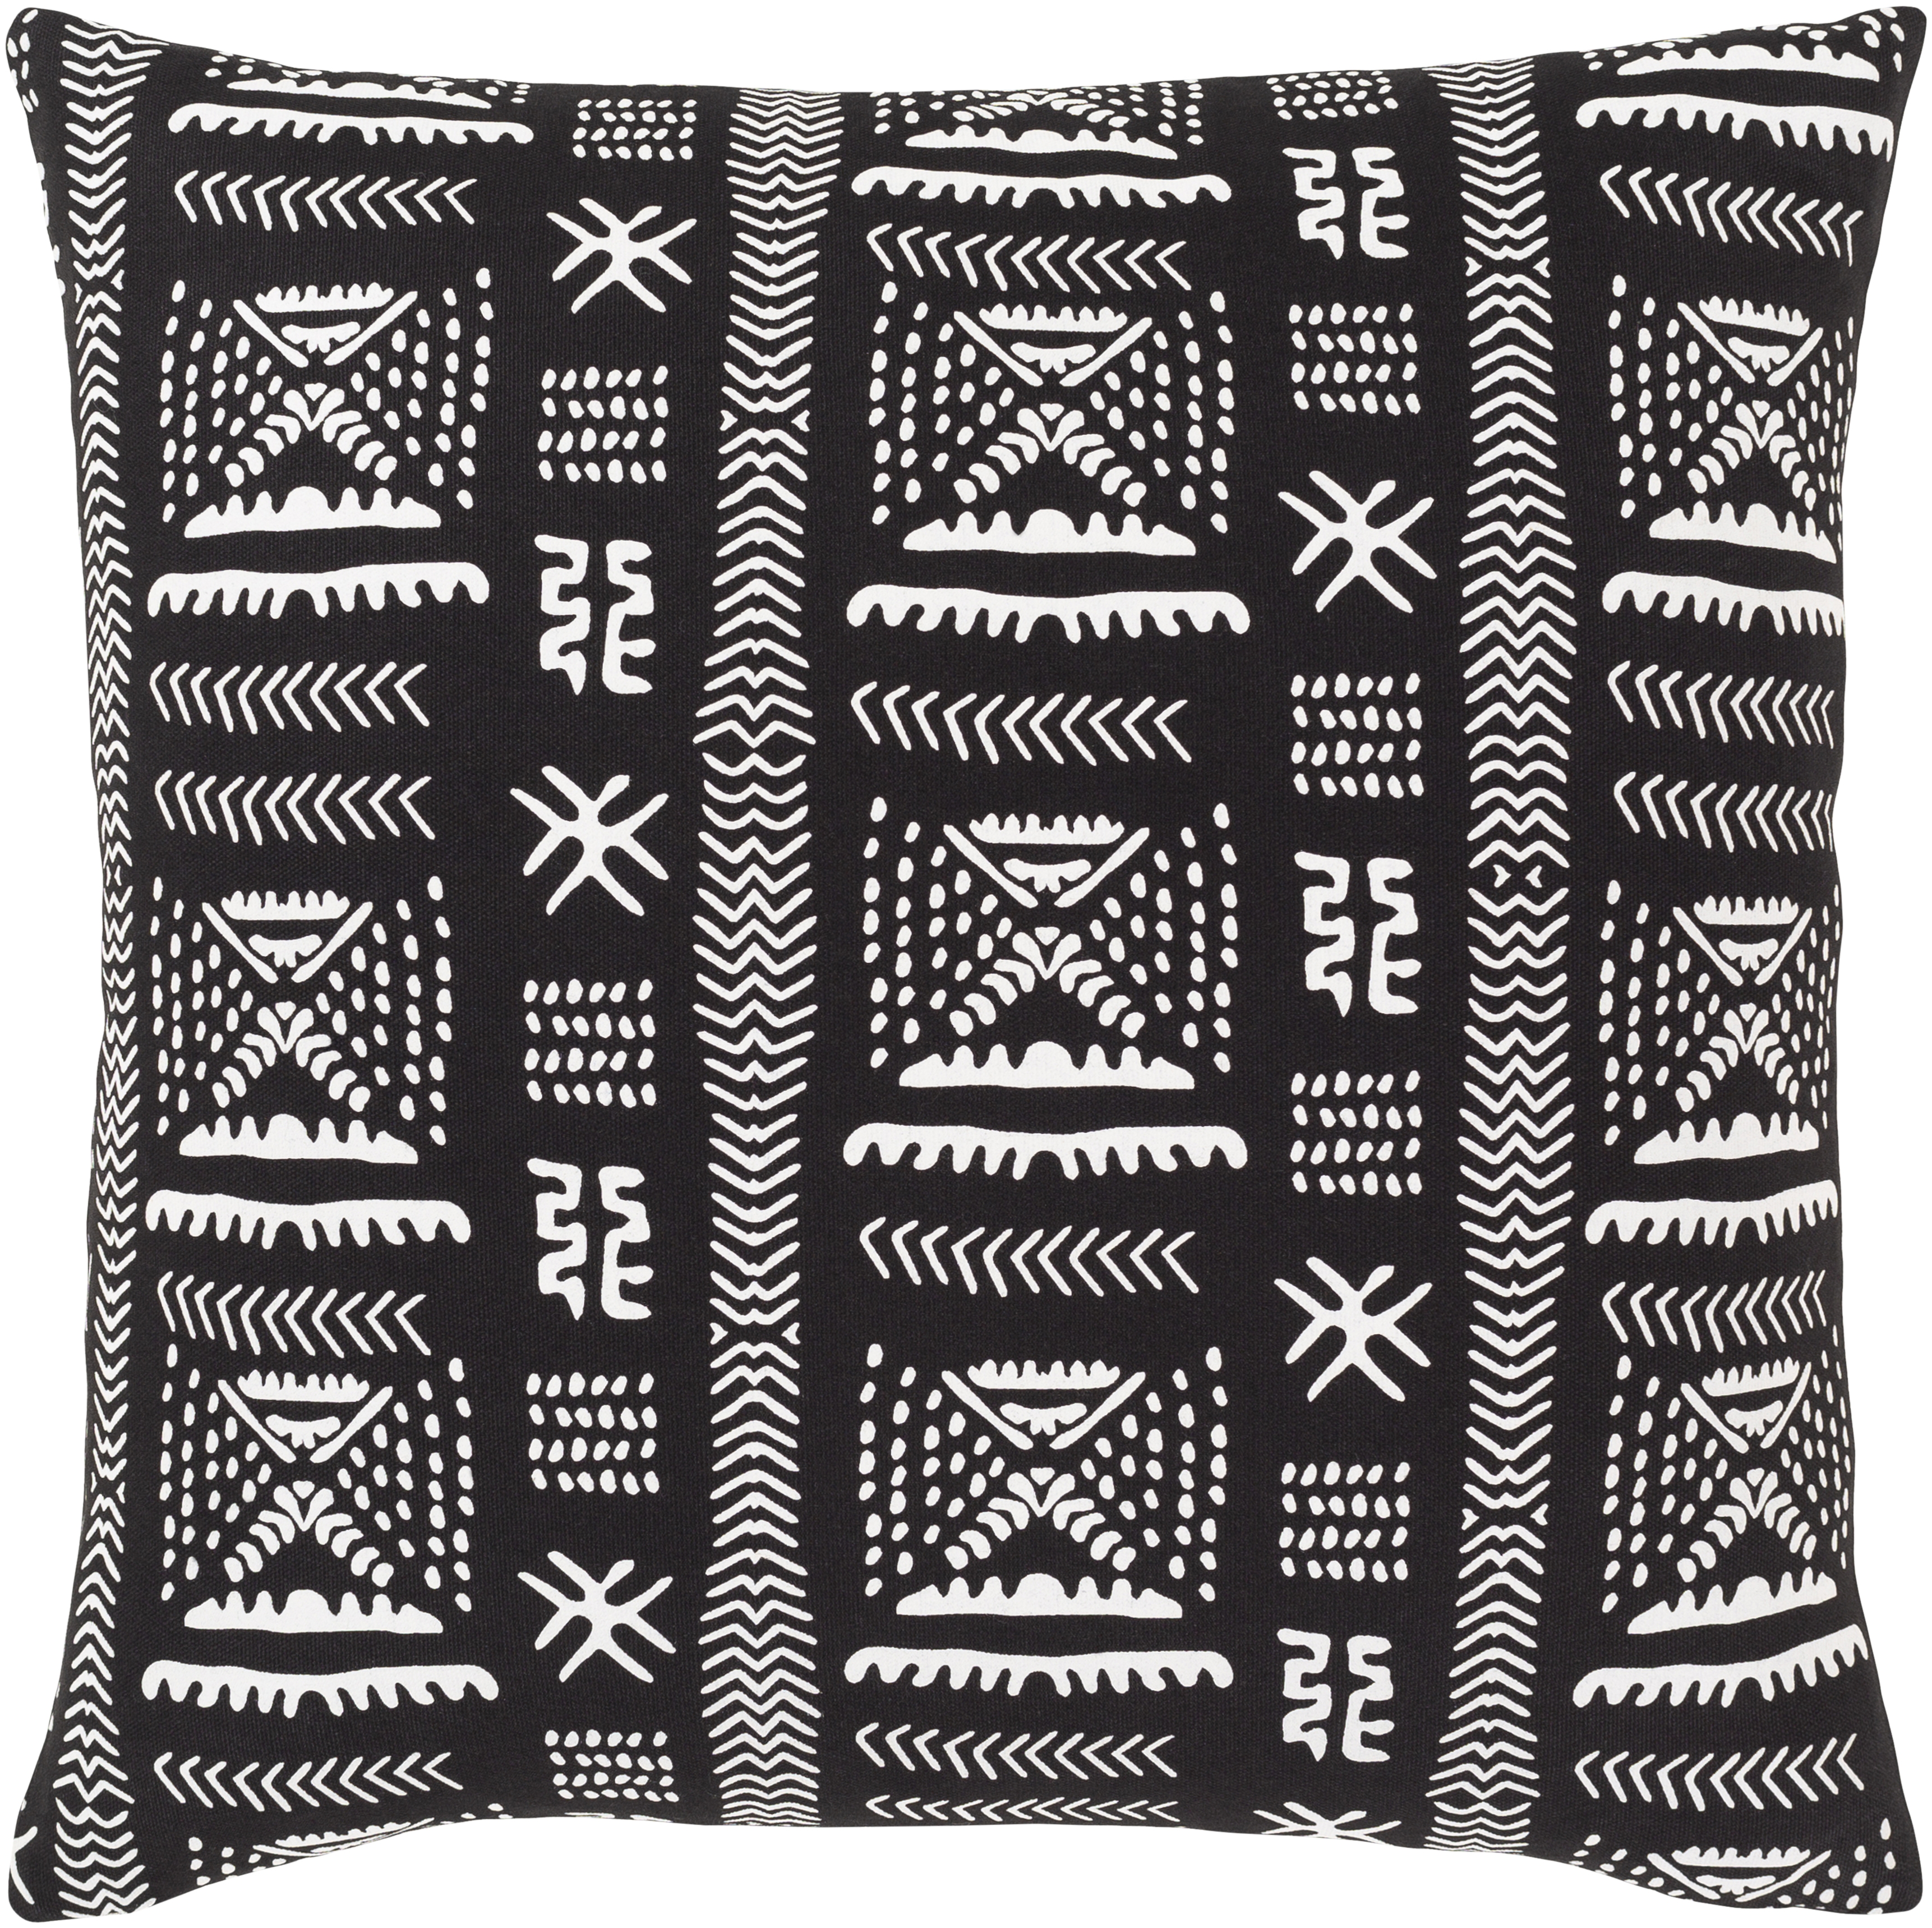 Mud Cloth - MDC-006 - 18" x 18" - pillow cover only - Image 0